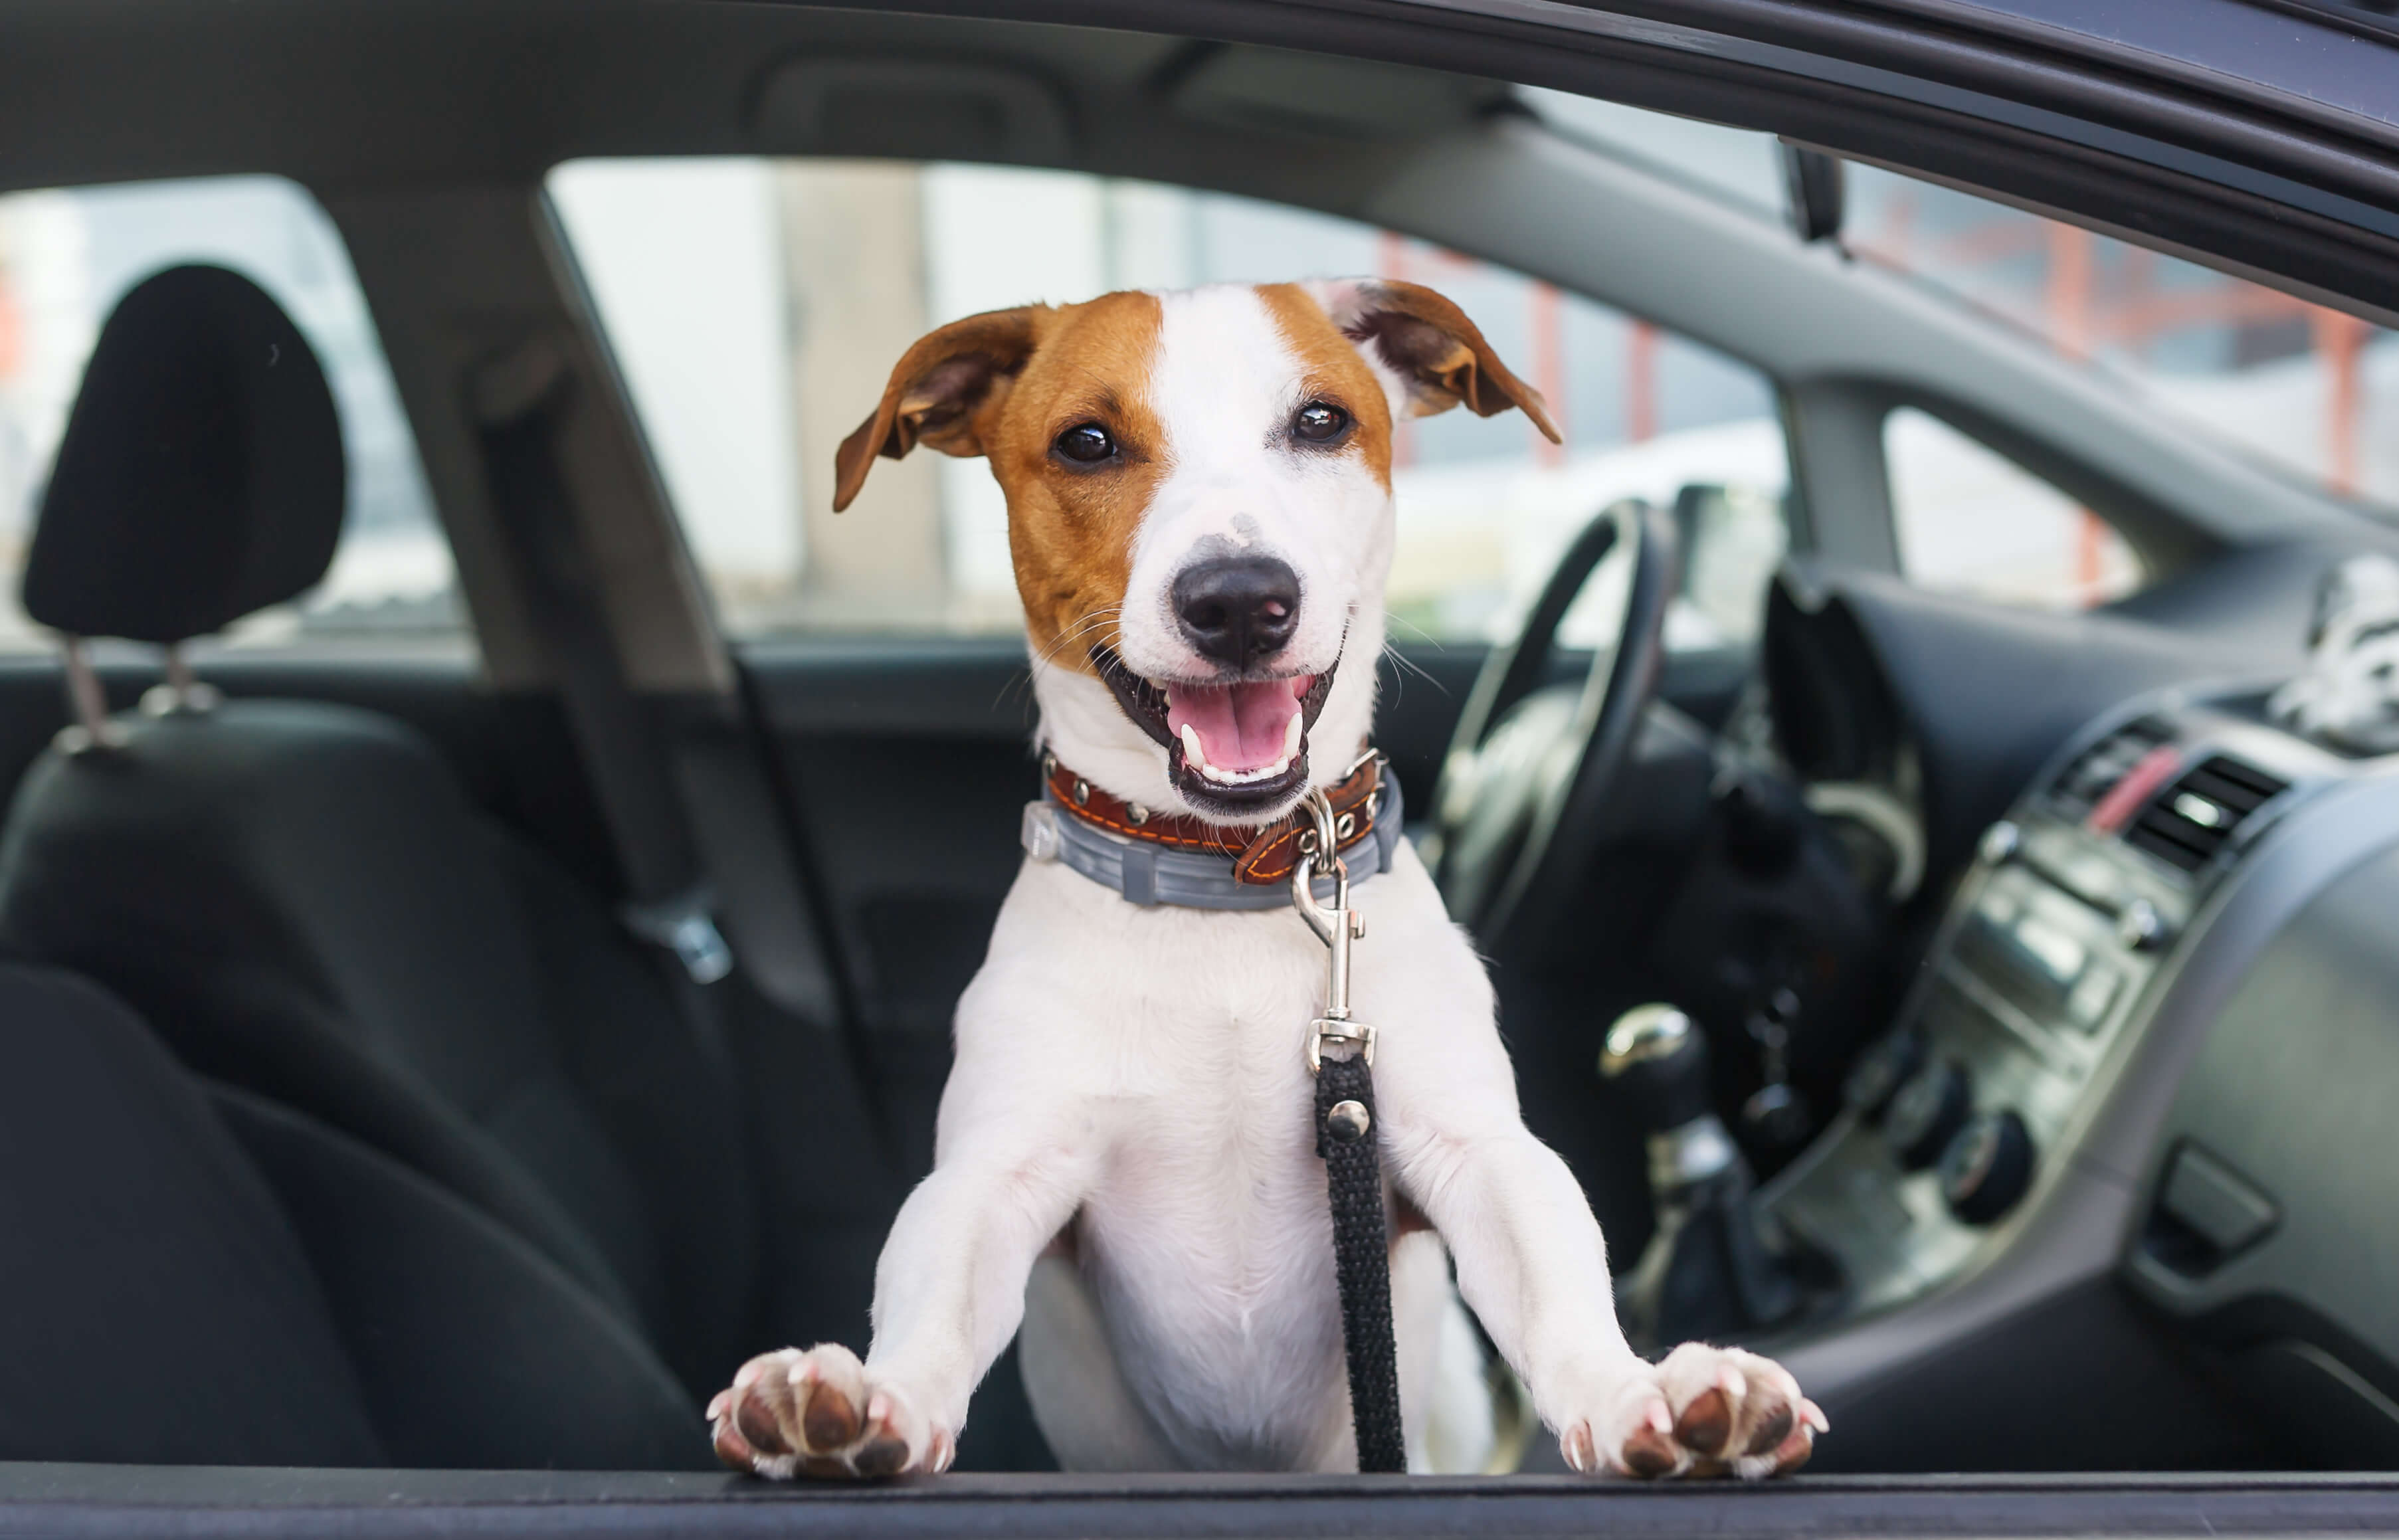 Why You Should Never Leave Your Dog in a Parked Car